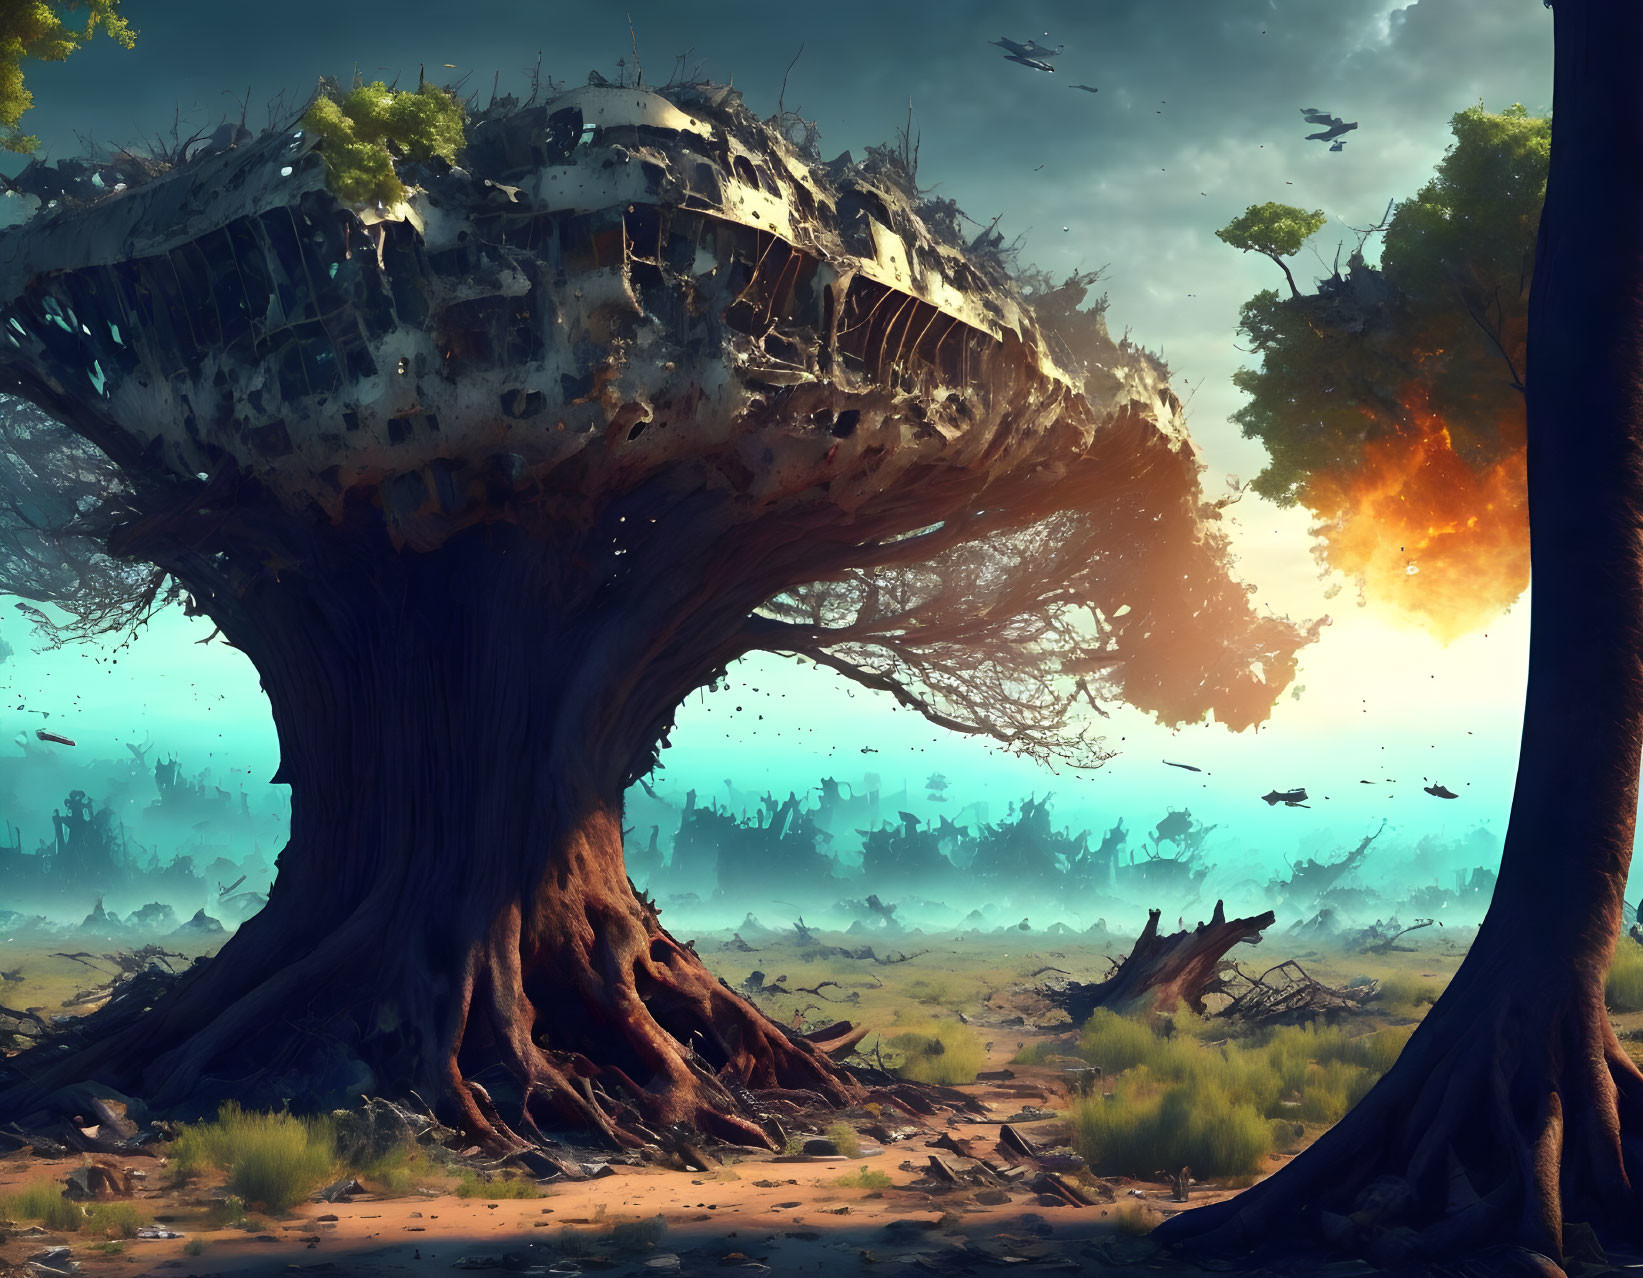 Ancient tree with spaceship in mystical forest, birds flying, blue haze